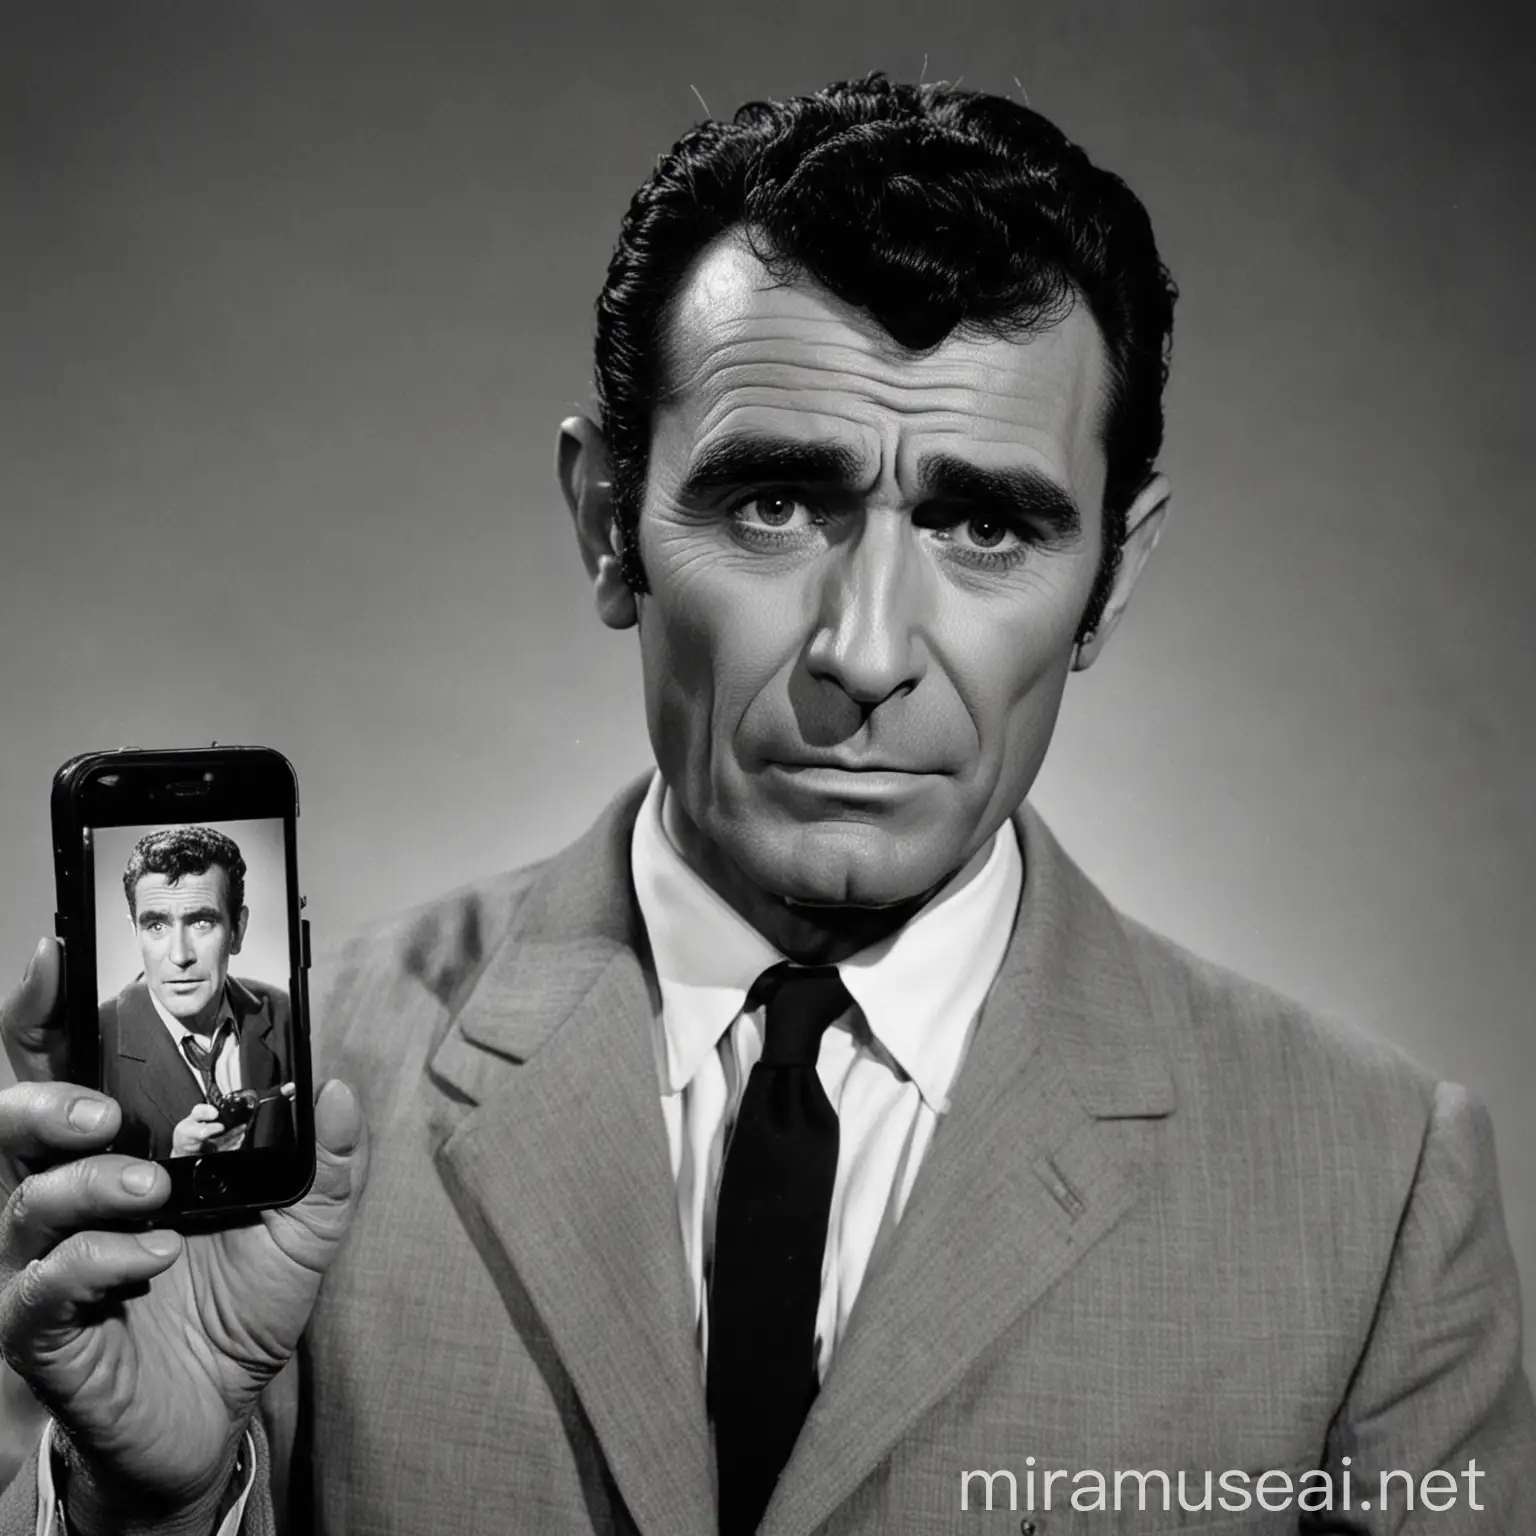 Rod Serling Rushes Out with Smartphone at Dawn